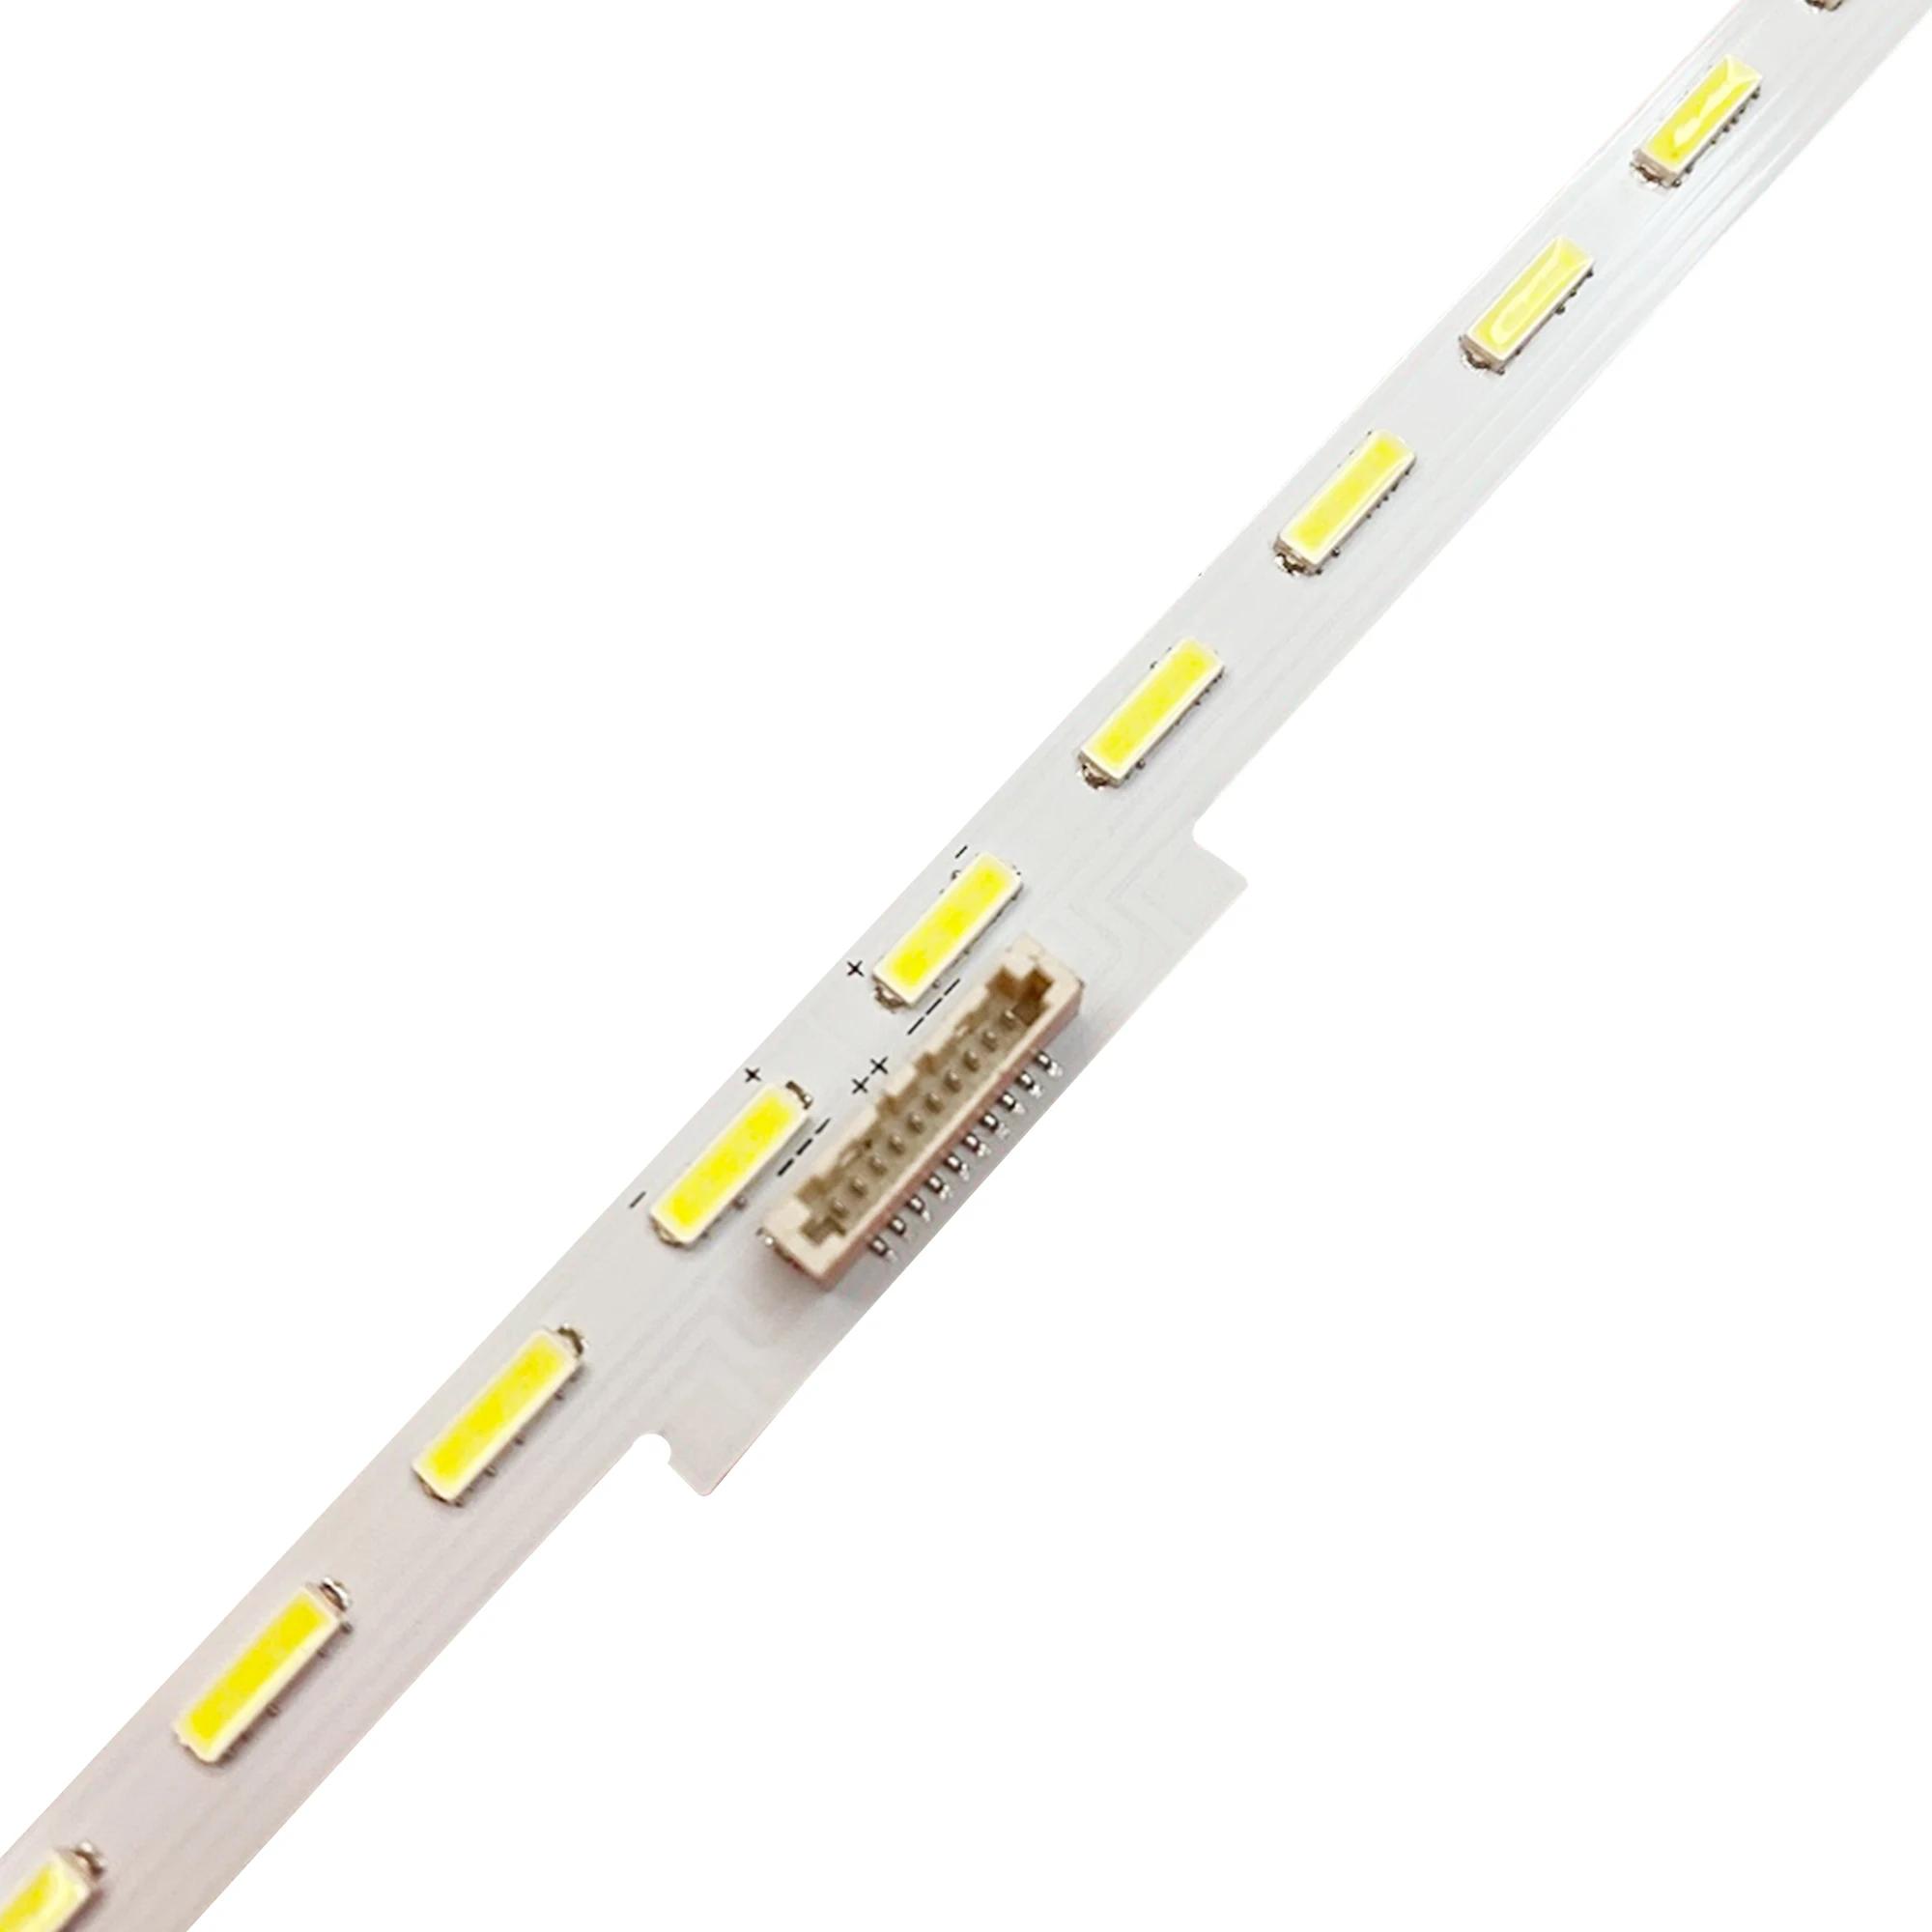 New10pcs/lot LED Ʈ Ʈ  KDL-40R550C KDL-40W705C KDL-40R453C KDL-40R510C LM41-00111A 4 564-297 NS5S400VND02